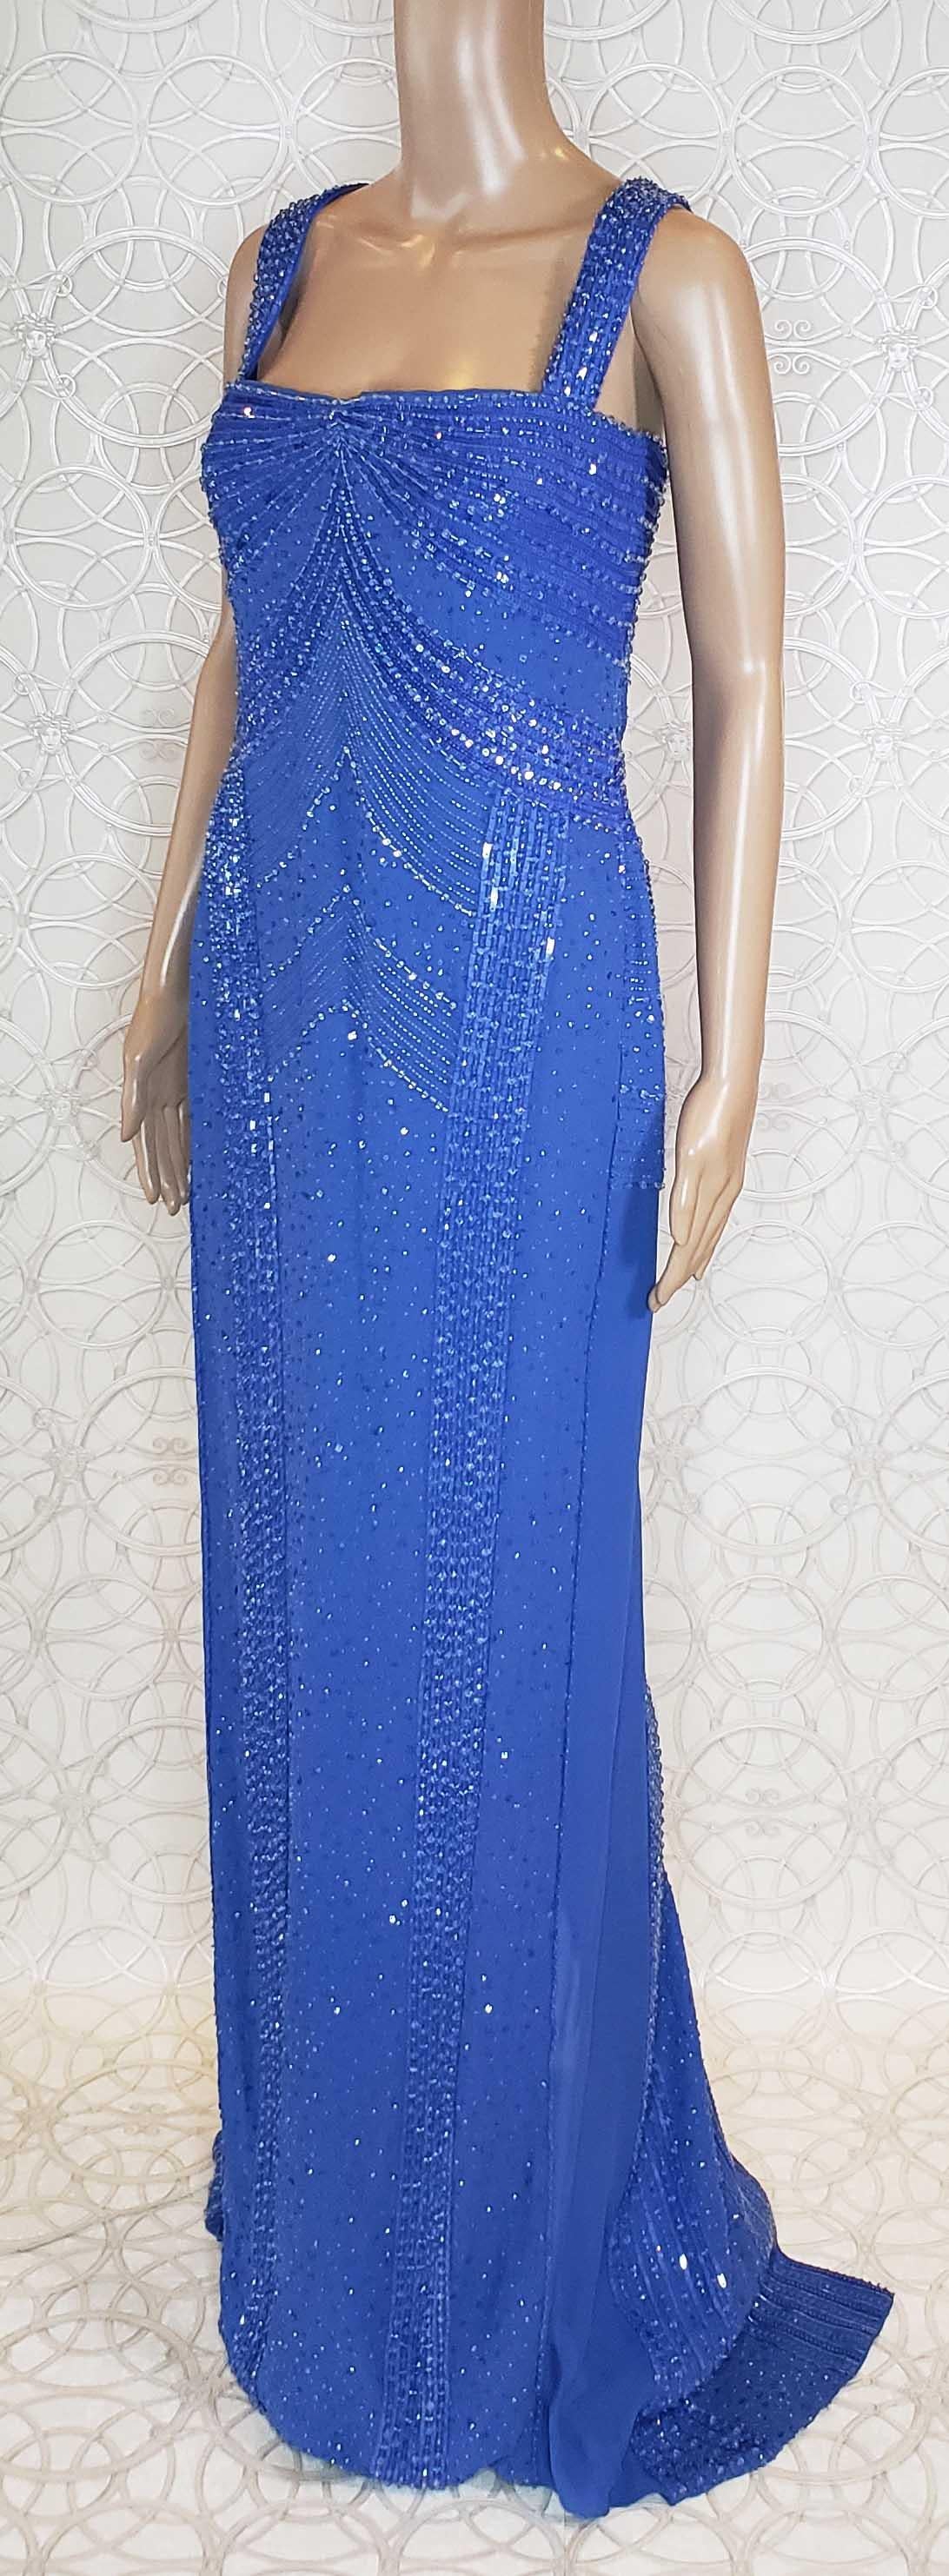 $12, 575 NEW VERSACE EMBELLISHED BLUE Gown 44 - 8 1